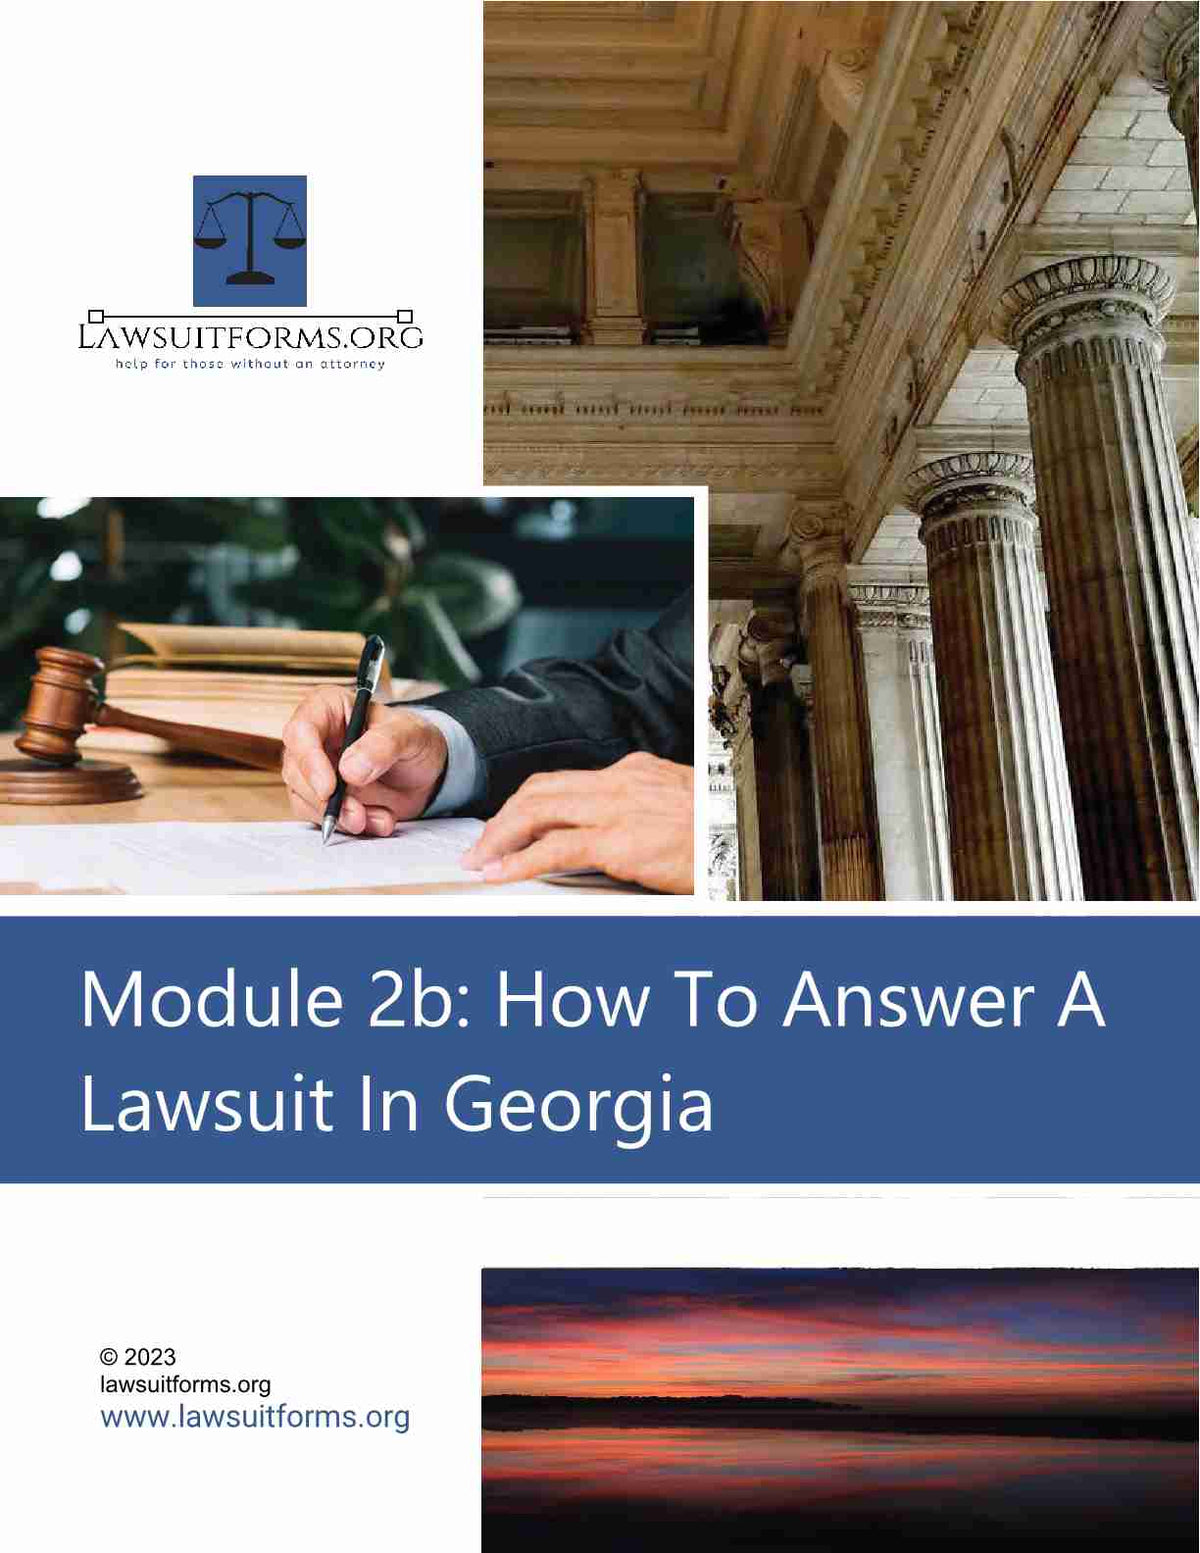 How to answer a lawsuit in Georgia